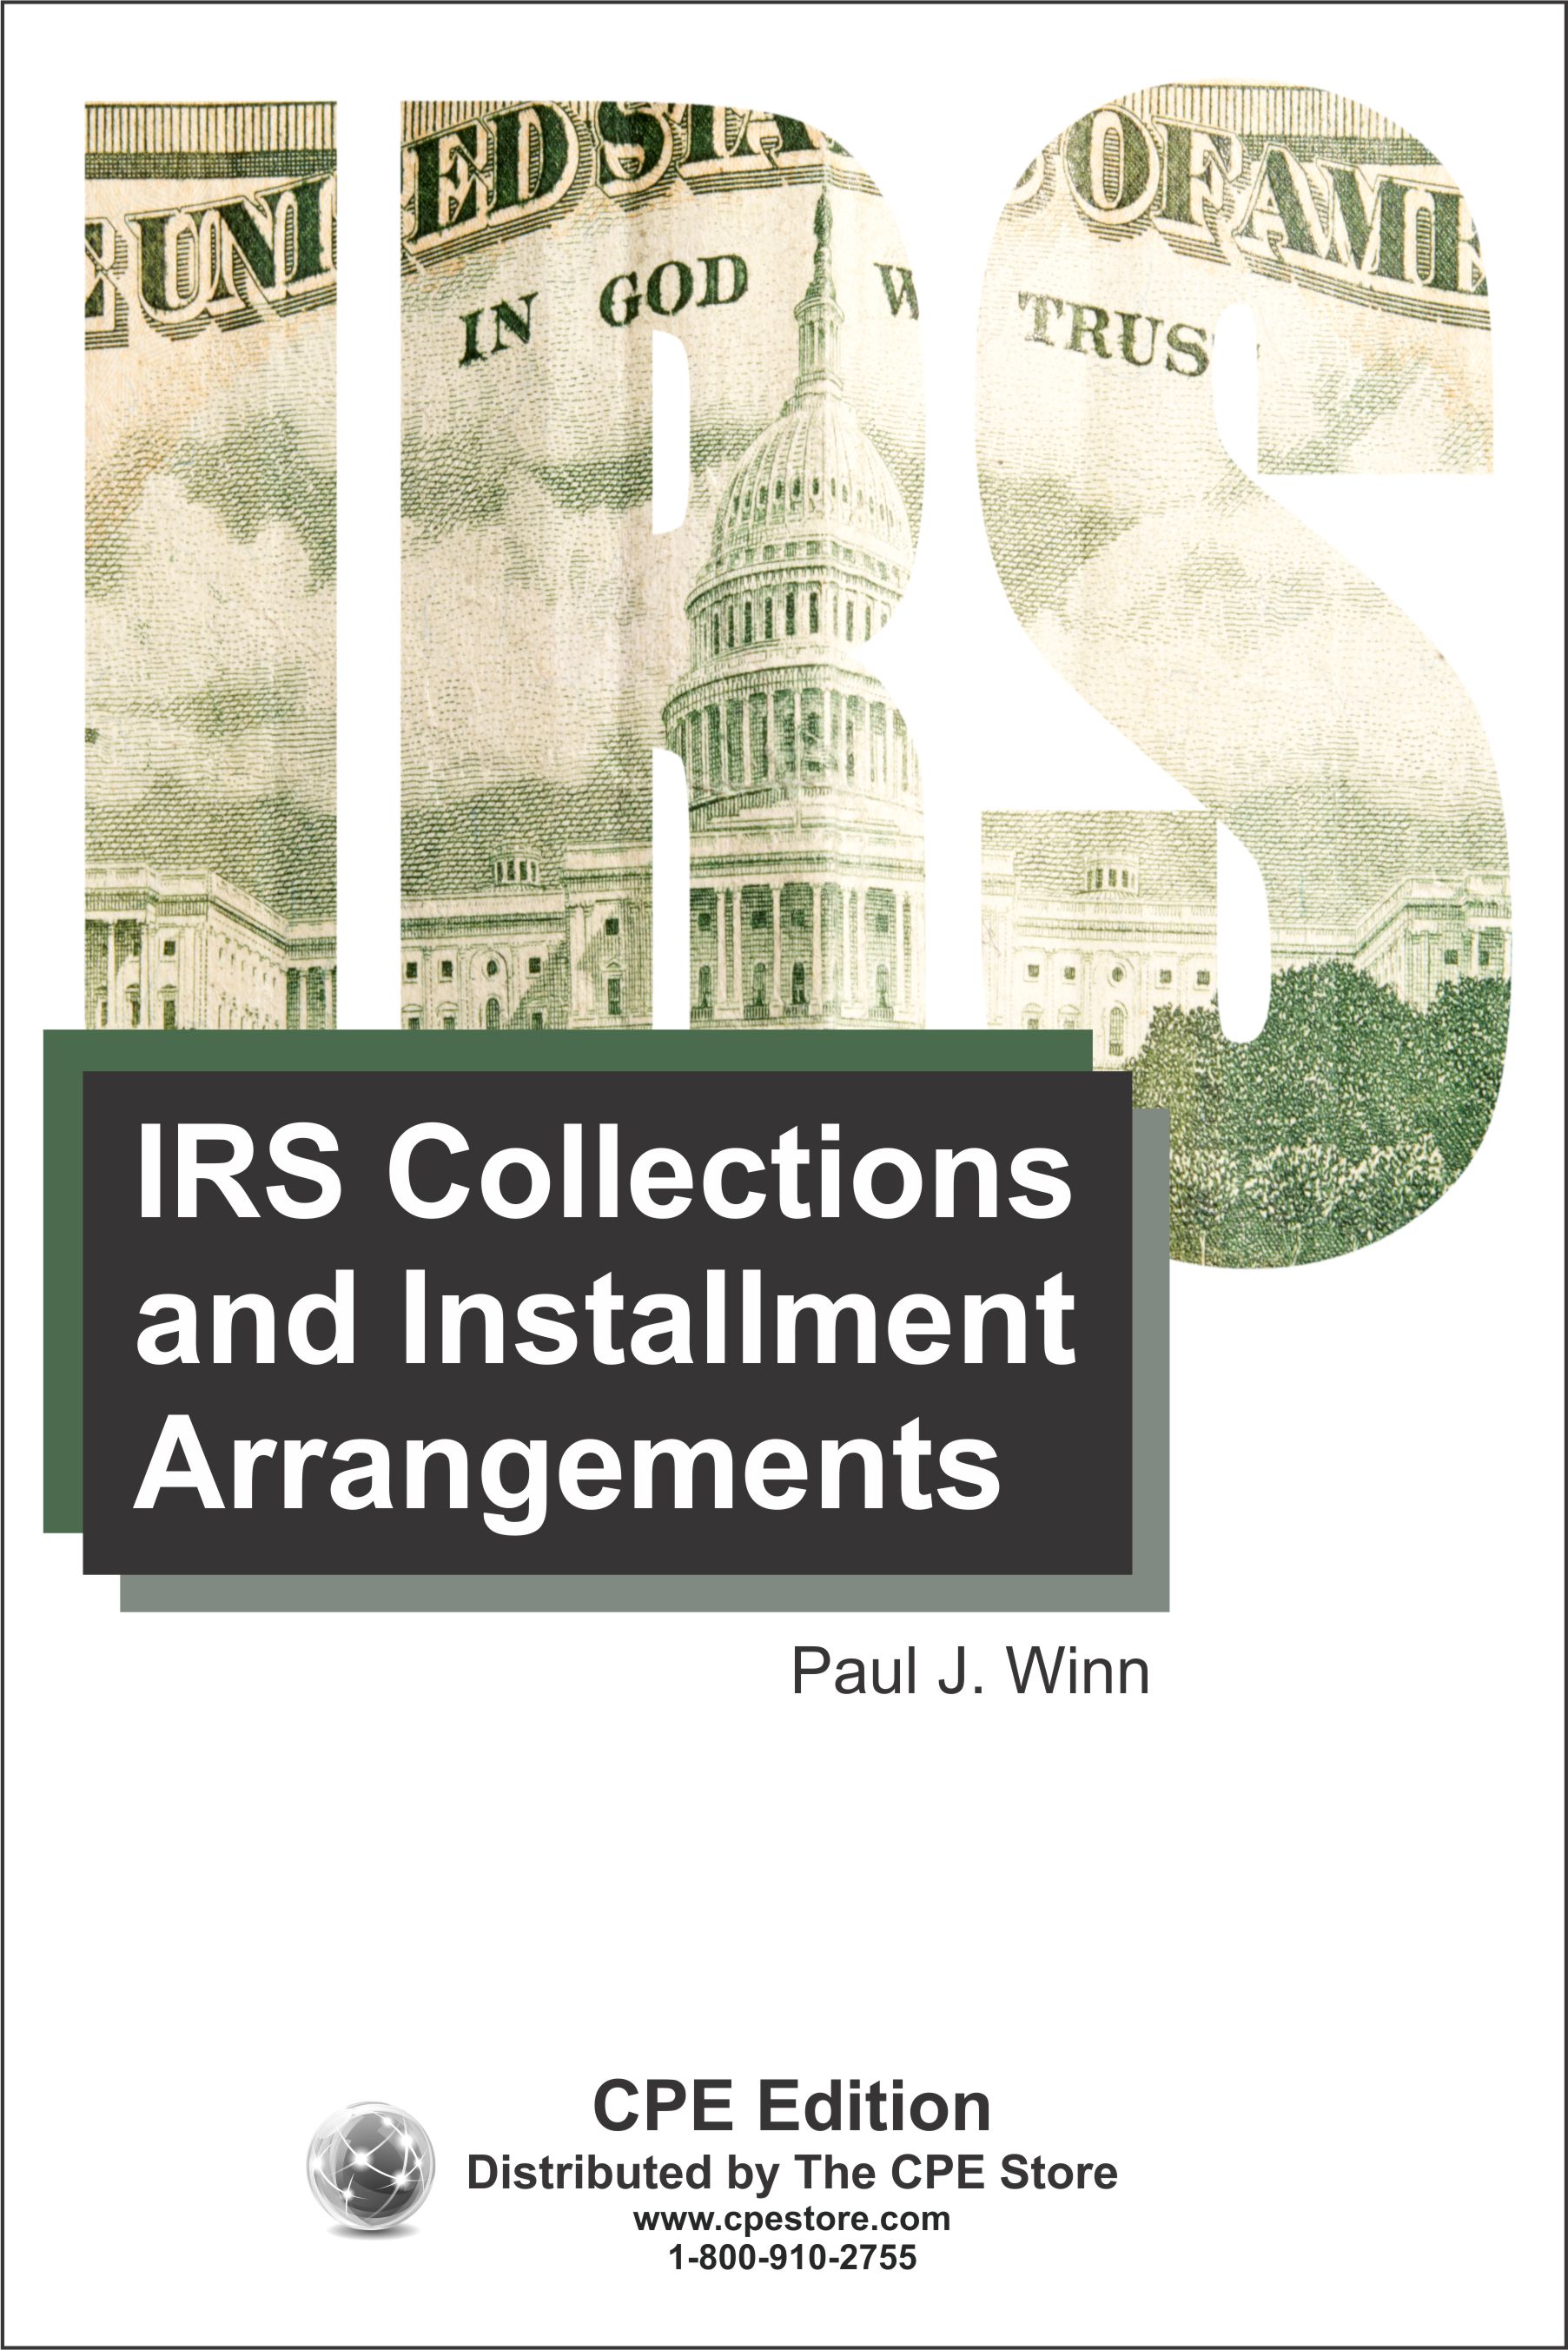 IRS Collections and Installment Arrangements